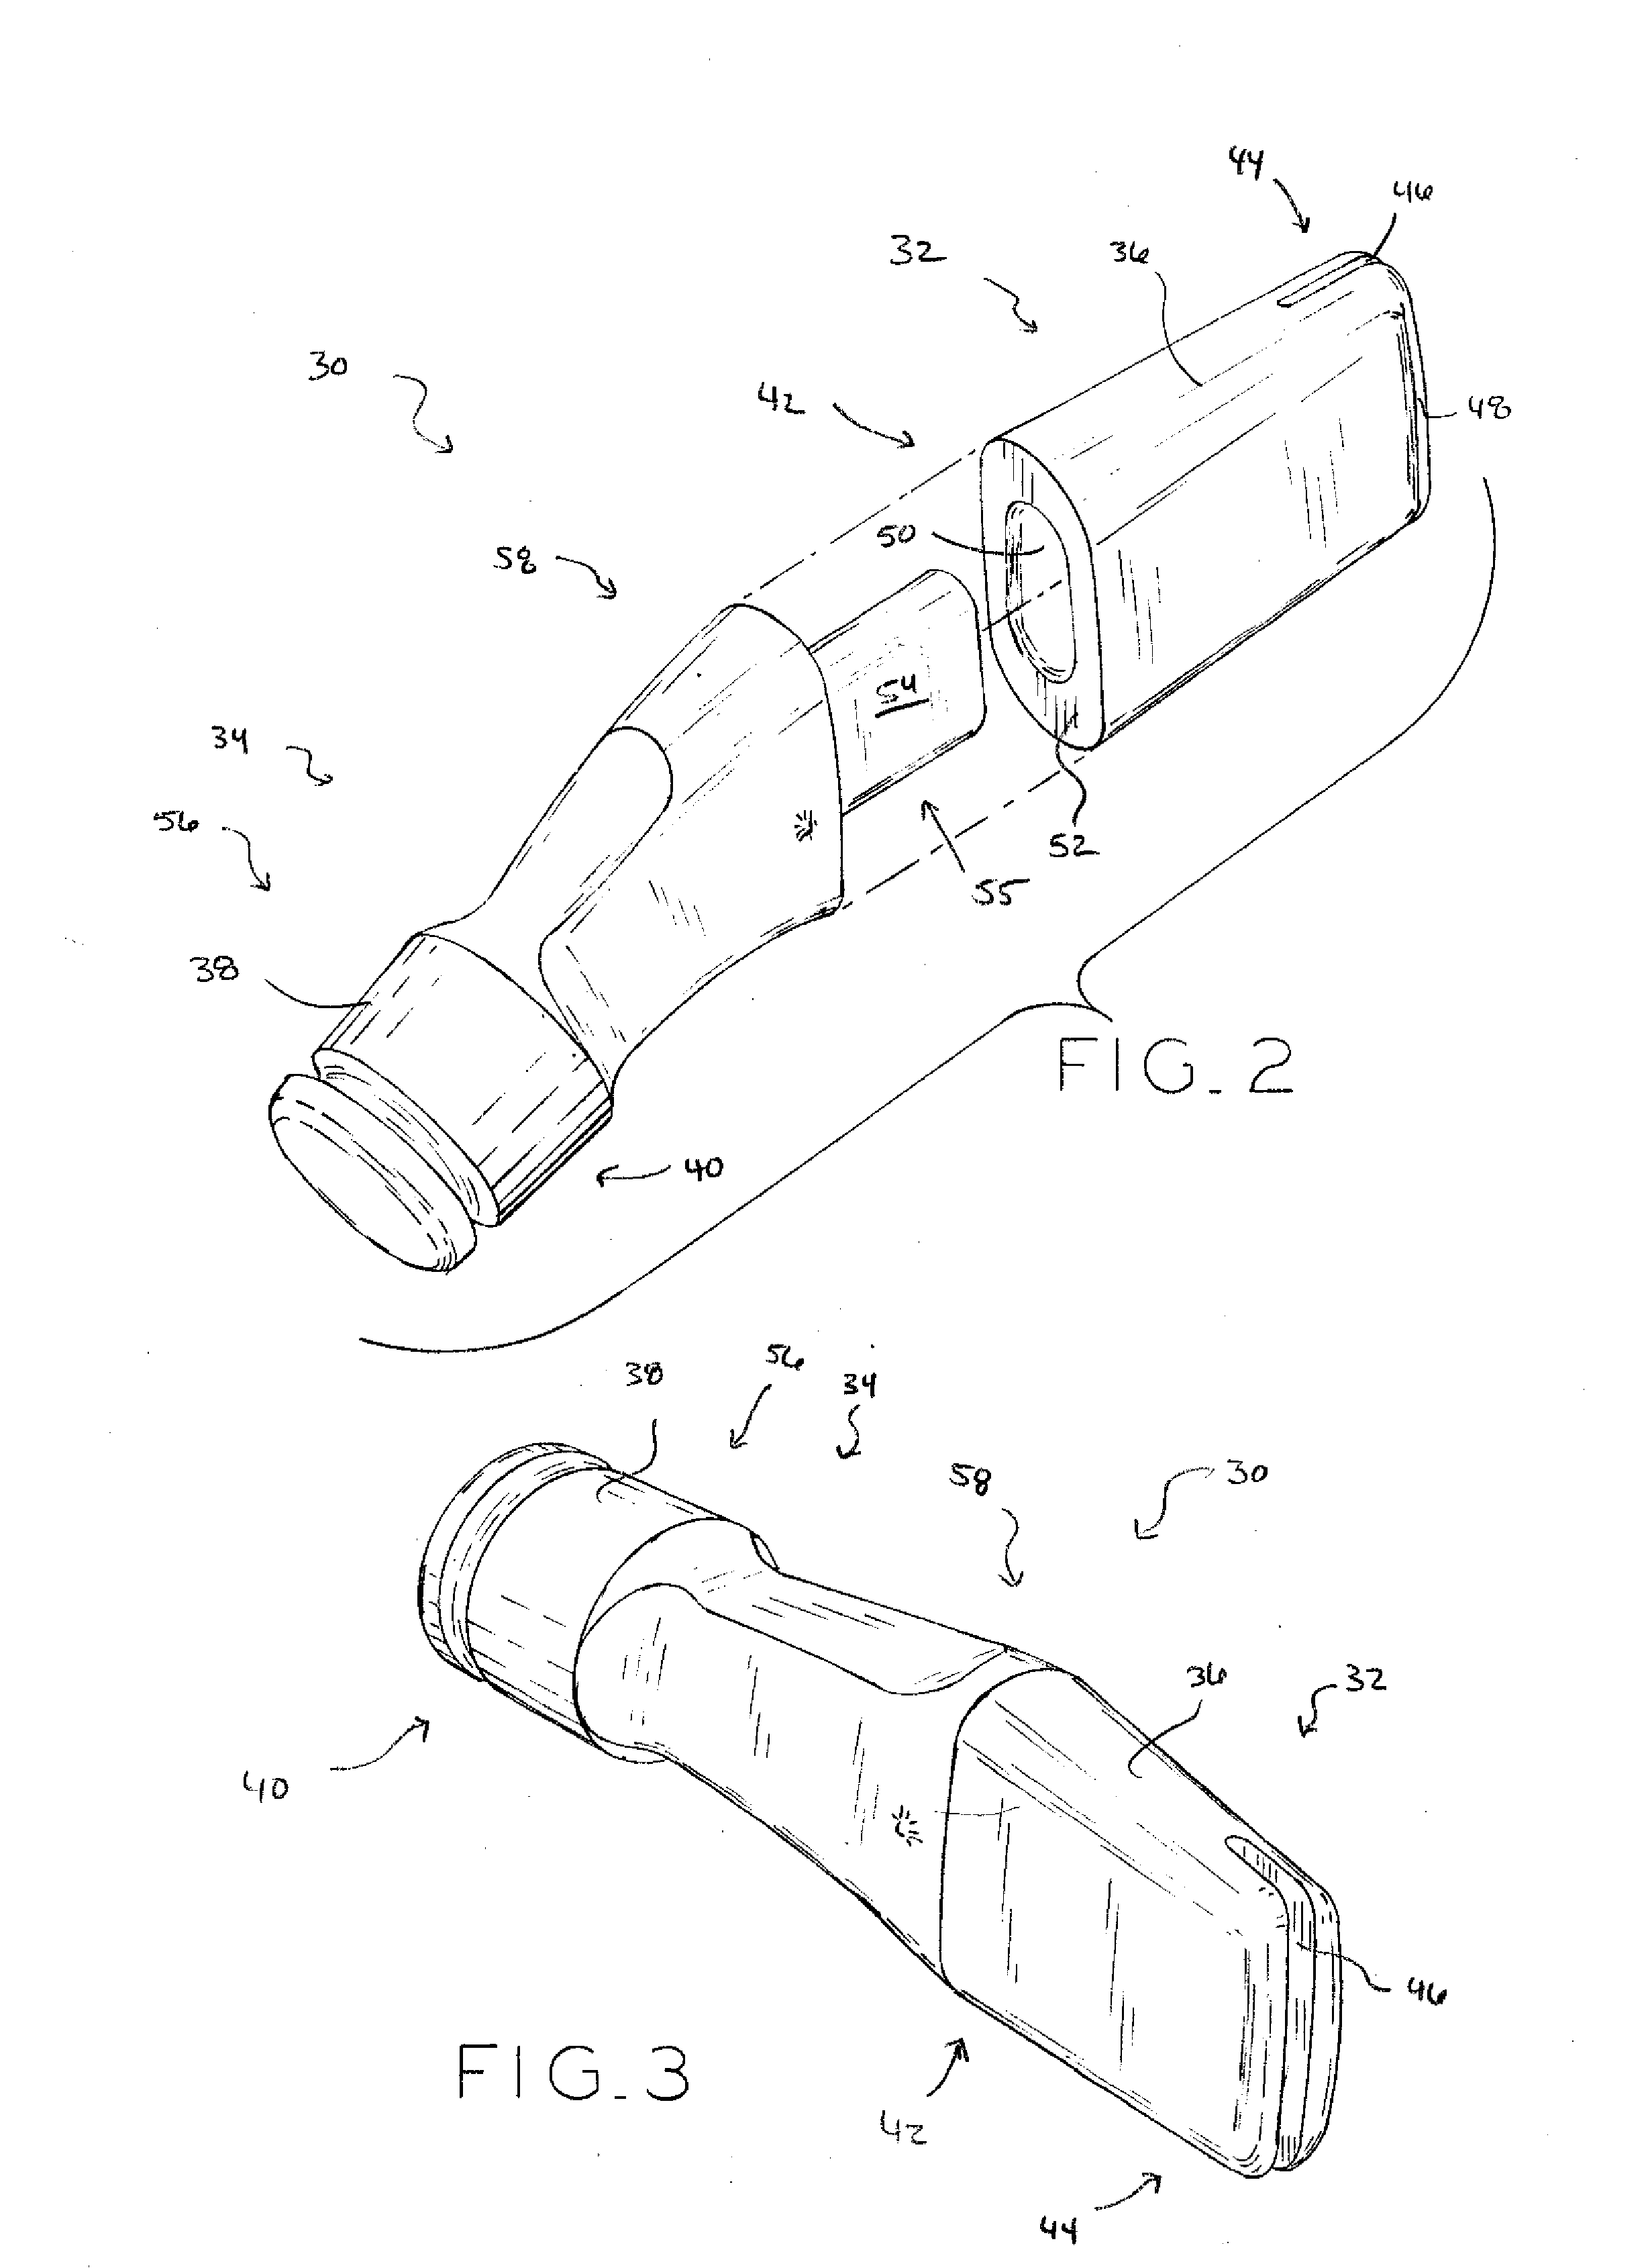 Provisional prosthetic component formed of multiple materials